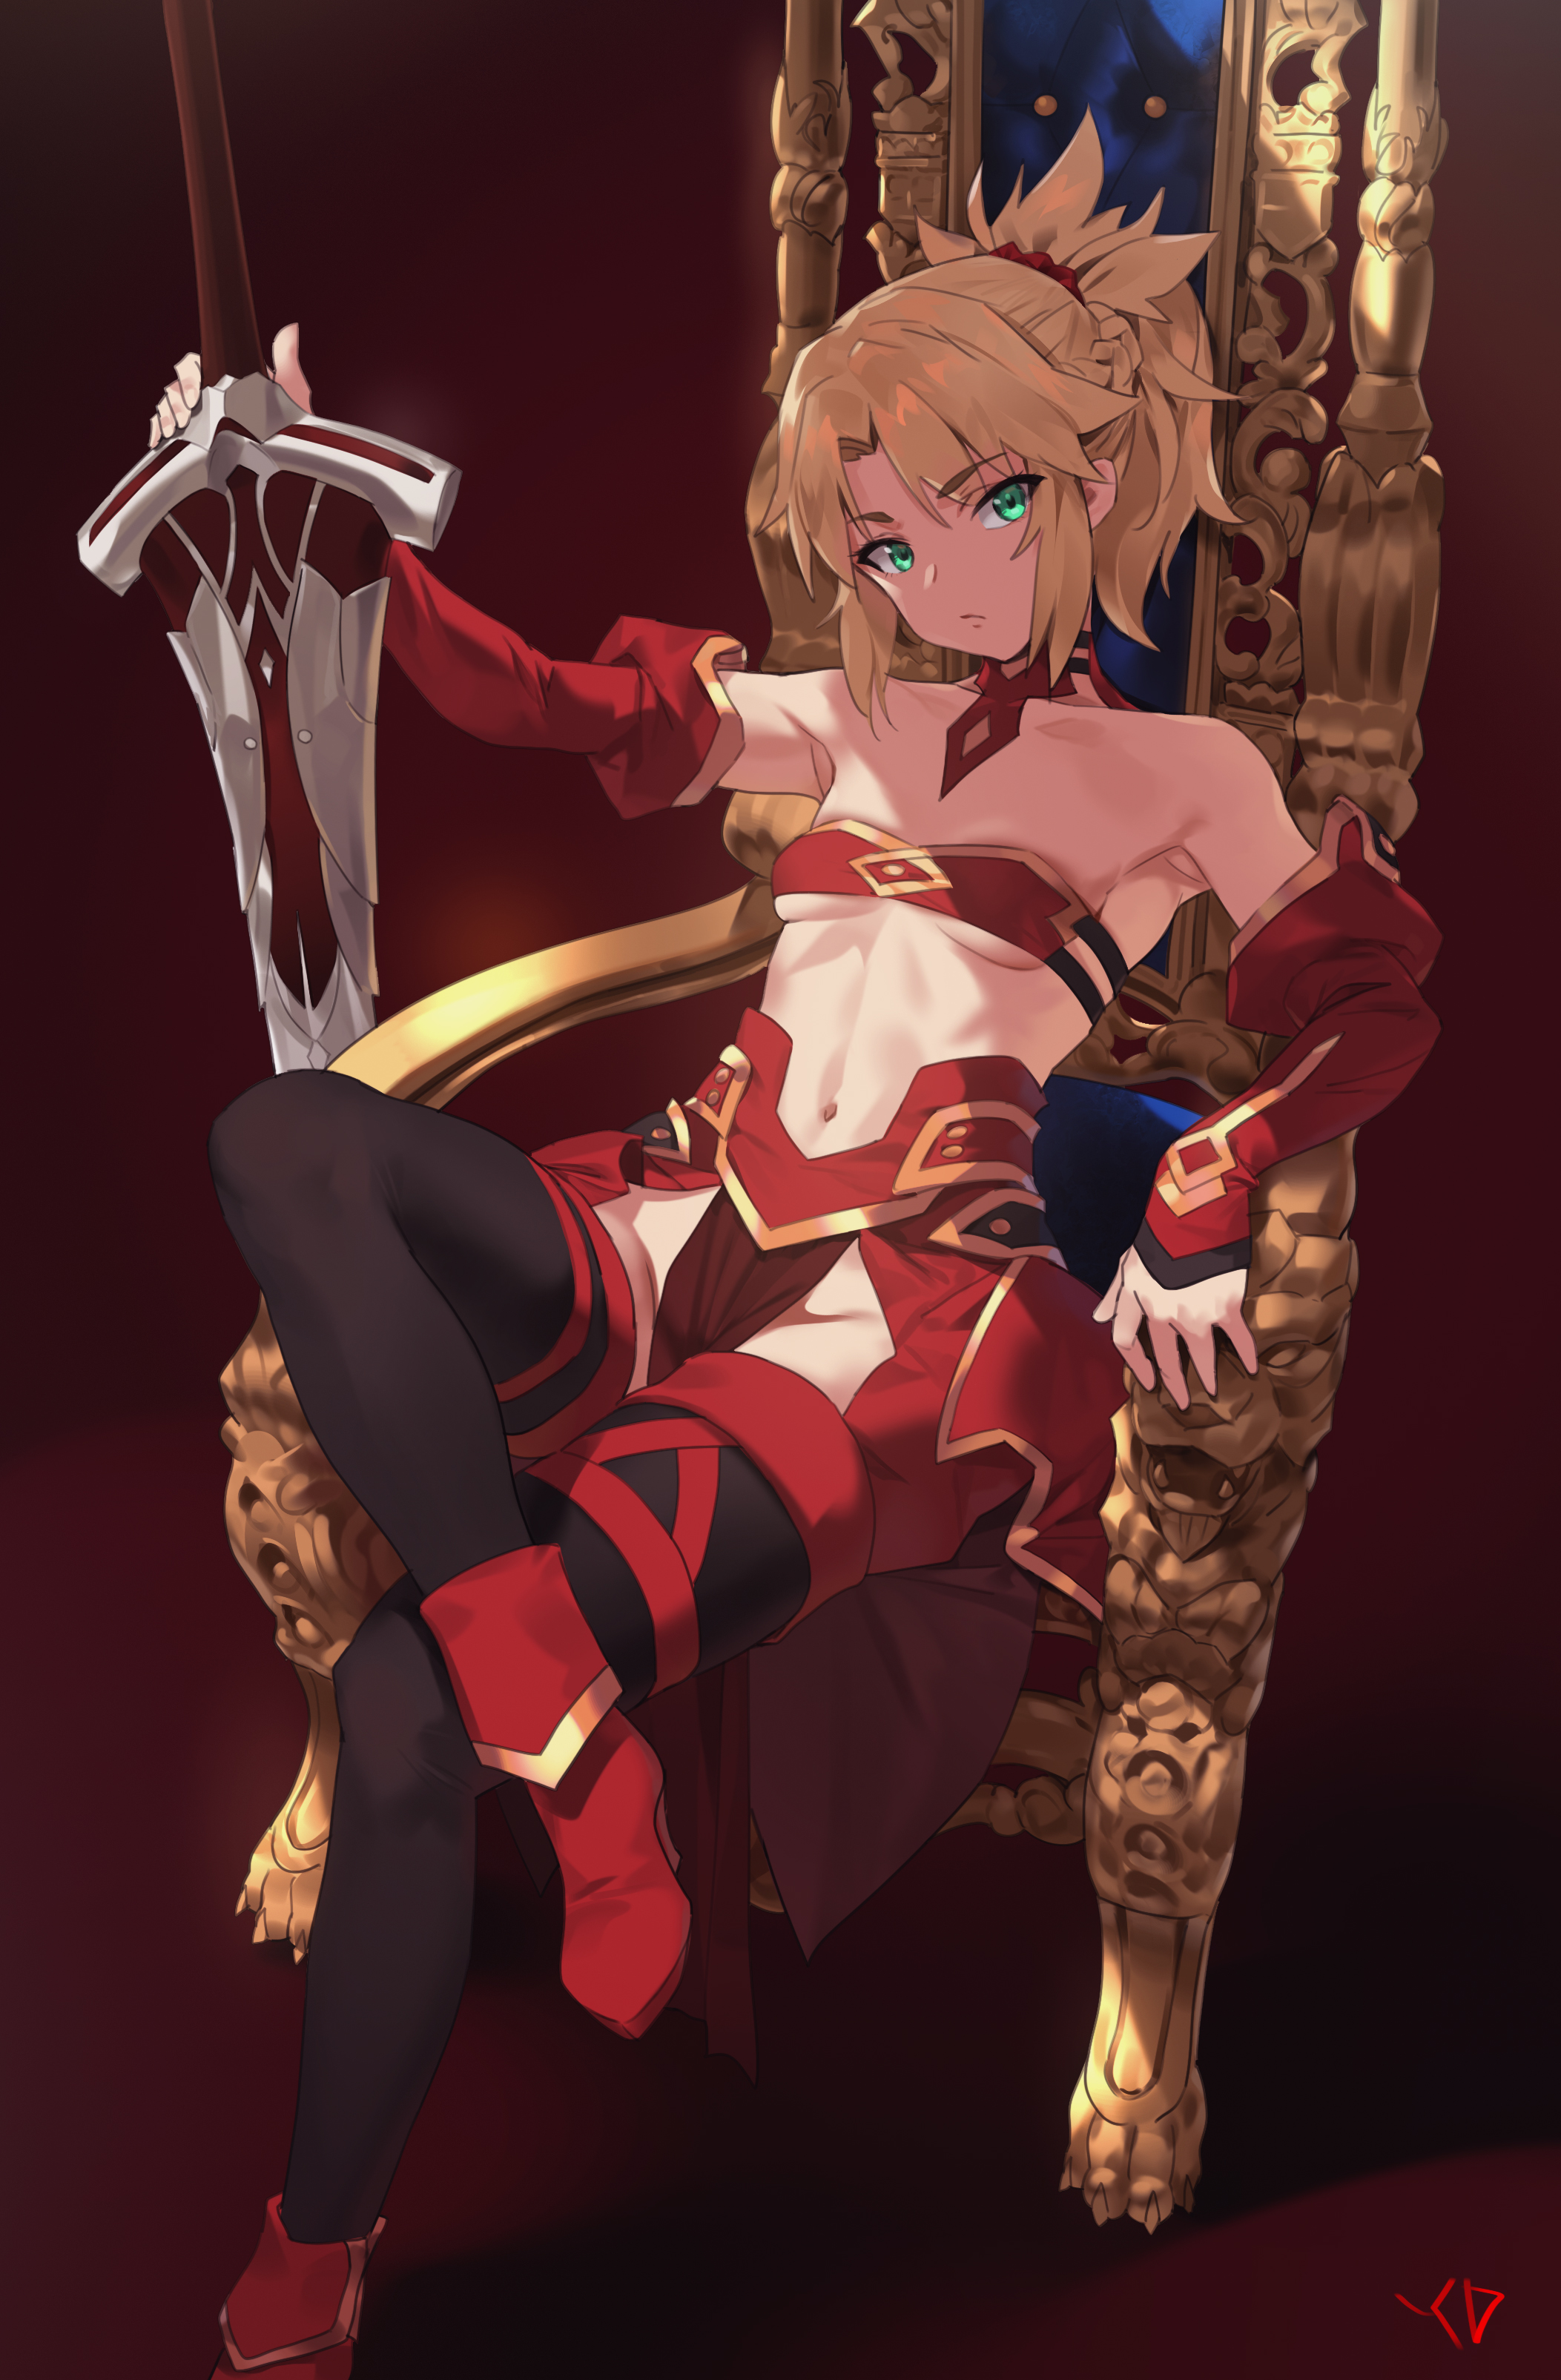 Anime 2105x3210 Mordred (Fate/Apocrypha) anime girls portrait display digital art artwork ponytail Fate/Grand Order Fate/Apocrypha  green eyes small boobs Fate series 2D fan art thighs thigh high boots red boots long sleeves cleavage ecchi belly button long hair women with swords thigh-highs Orange Maru blonde